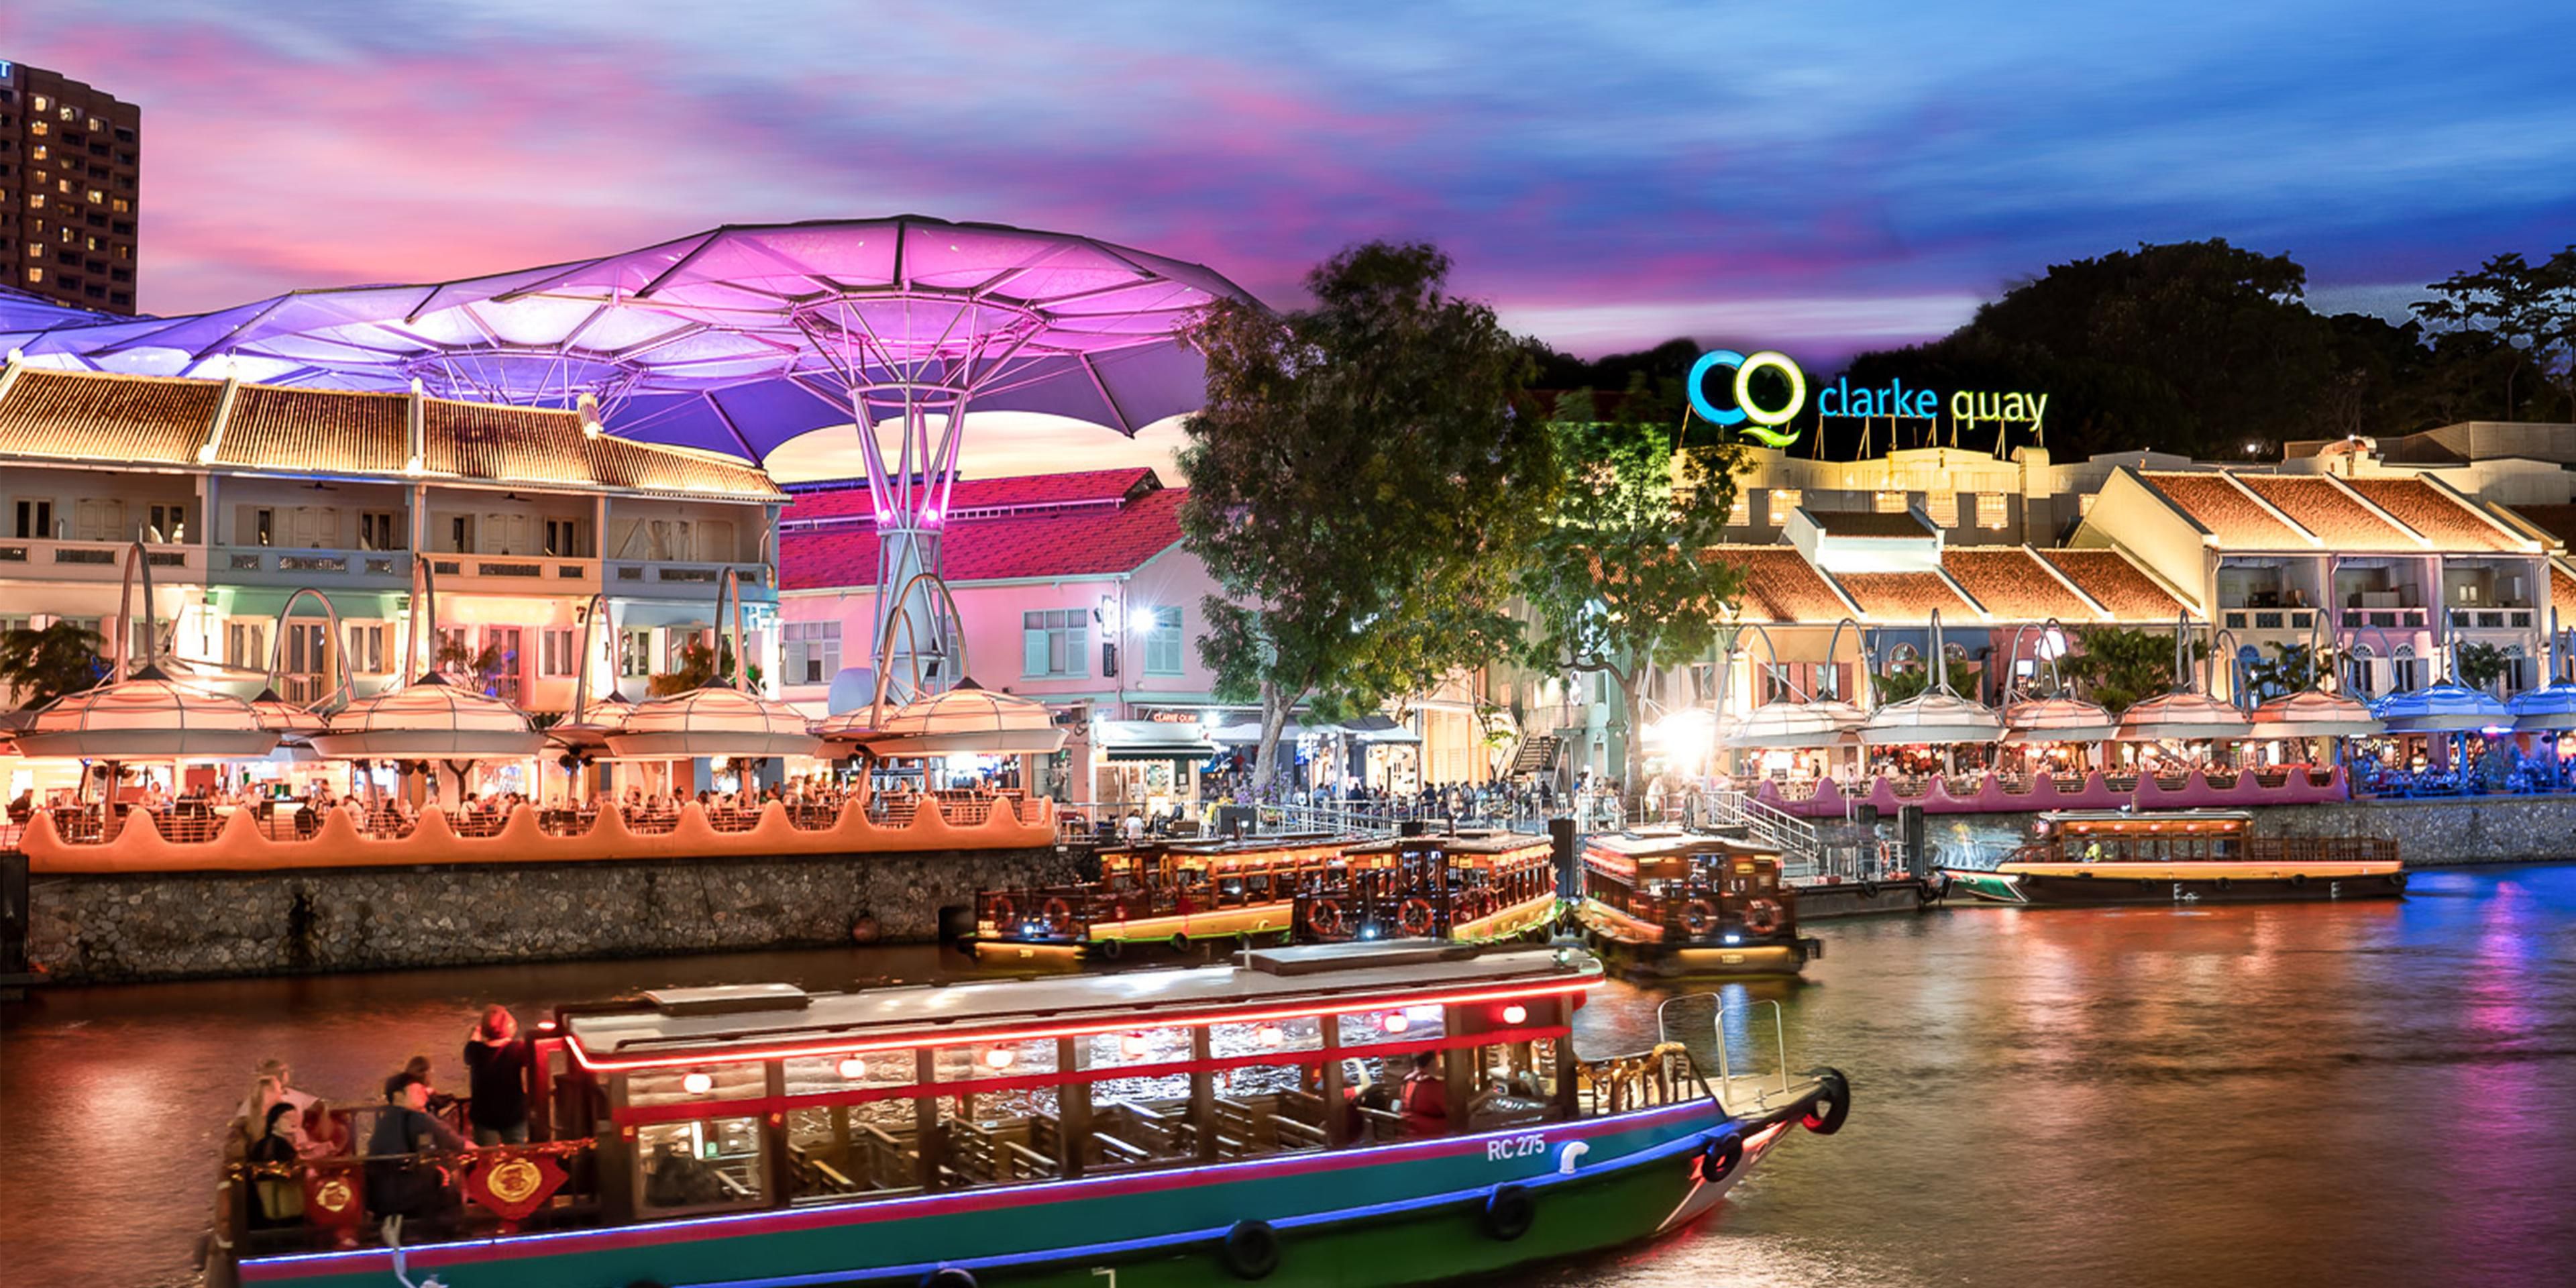 Conveniently located within walking distance with multiple train stations to Clarke Quay, Chinatown, and Fort Canning. Explore Singapore’s major attractions by taking a river cruise down to popular landmarks, uncover the heritage of Chinatown or simply take a walk at the iconic hilltop at Fort Canning.